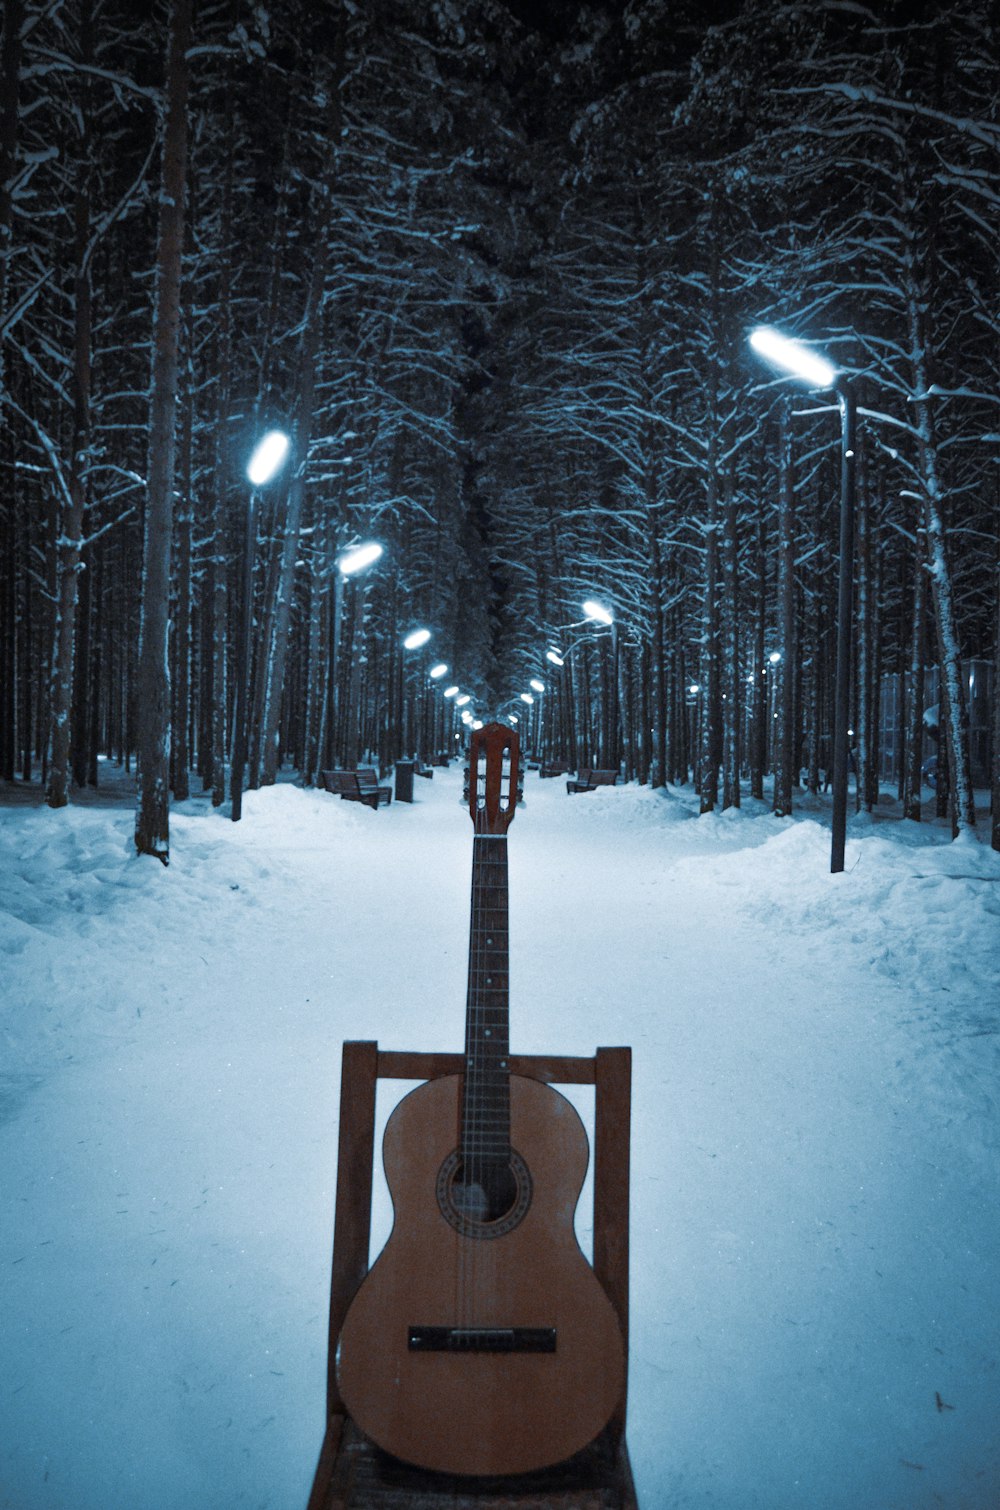 Brown acoustic guitar on snow covered ground photo – Free Grey Image on  Unsplash